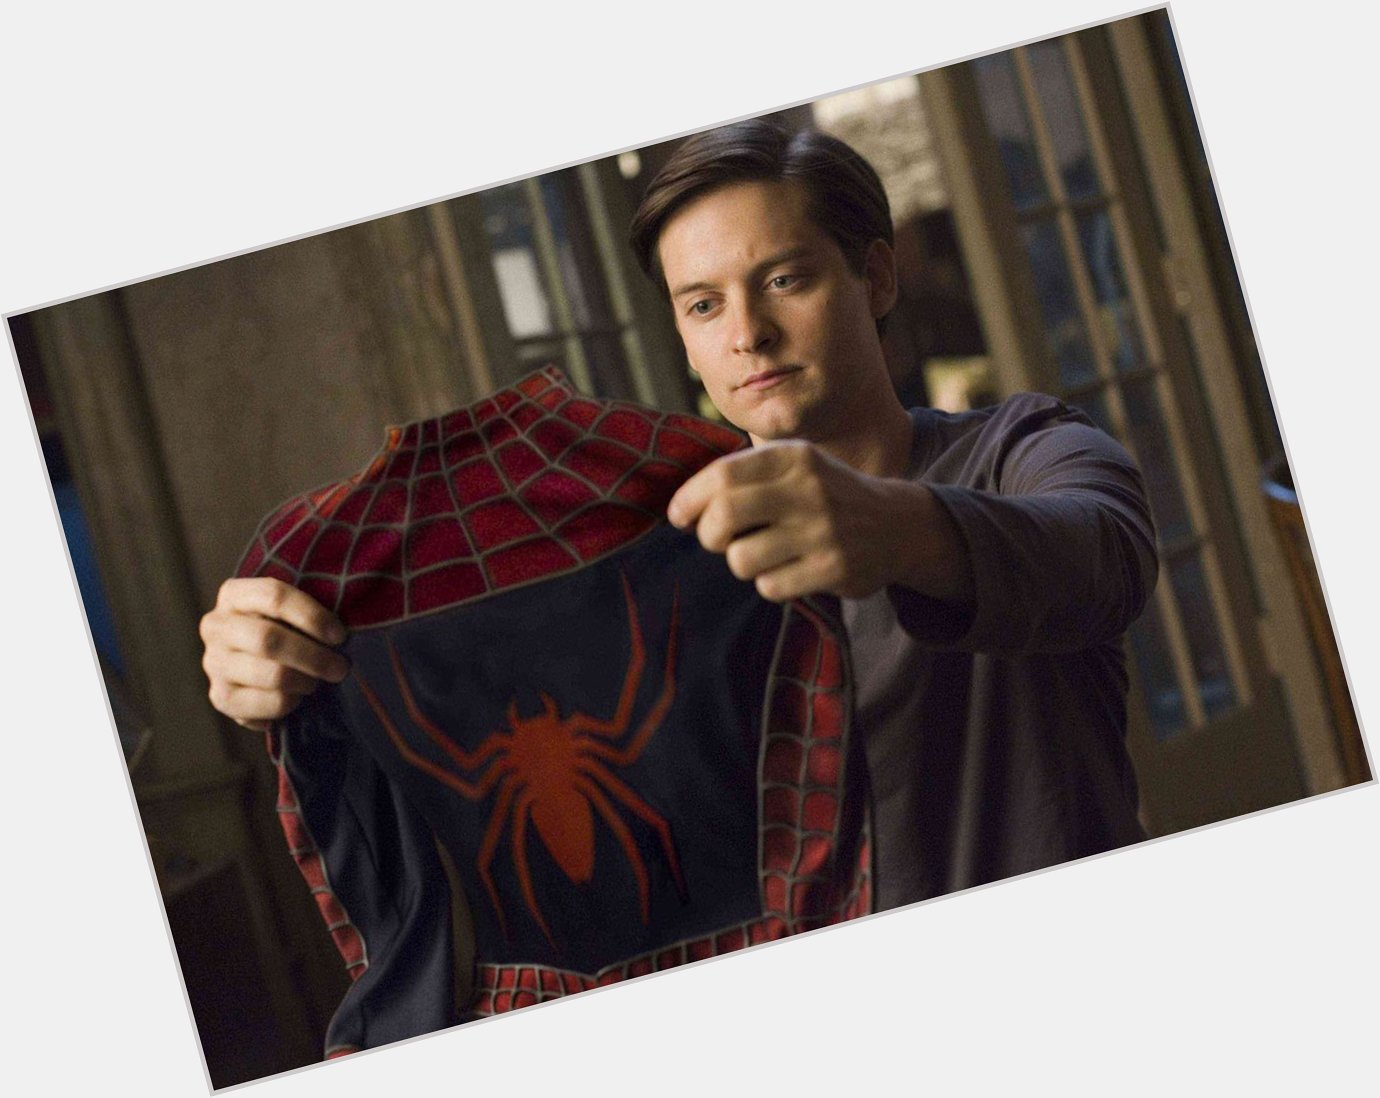 Happy Birthday to Tobey Maguire, who turns 42 today! 